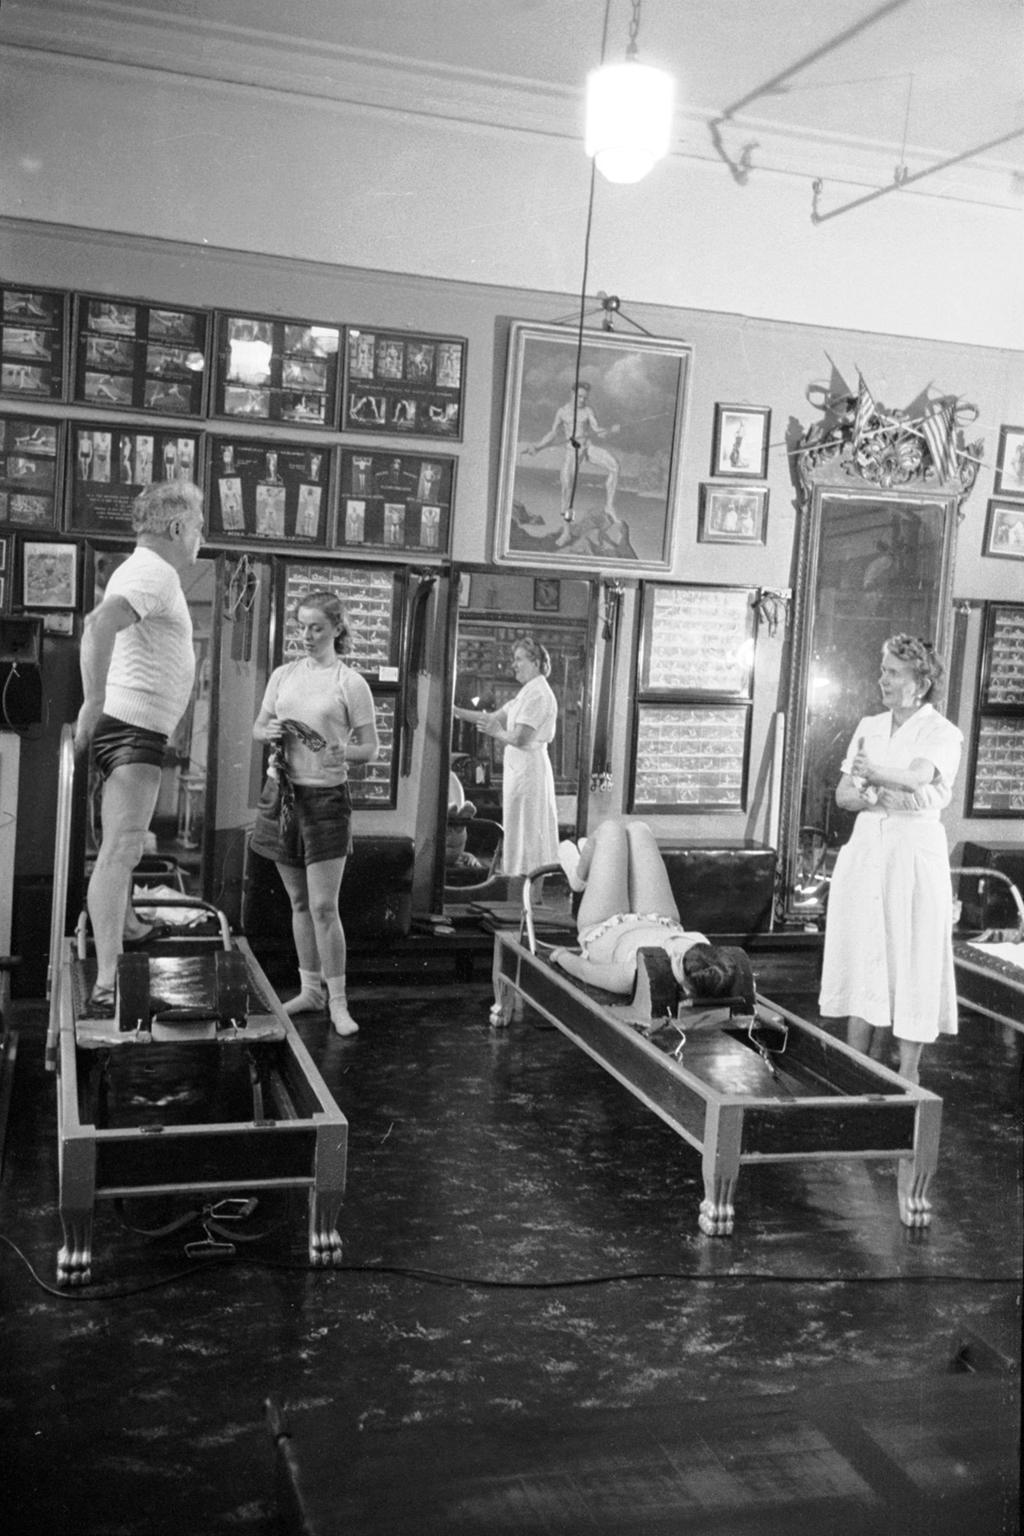 The 100-year history of Pilates: from niche workout to global